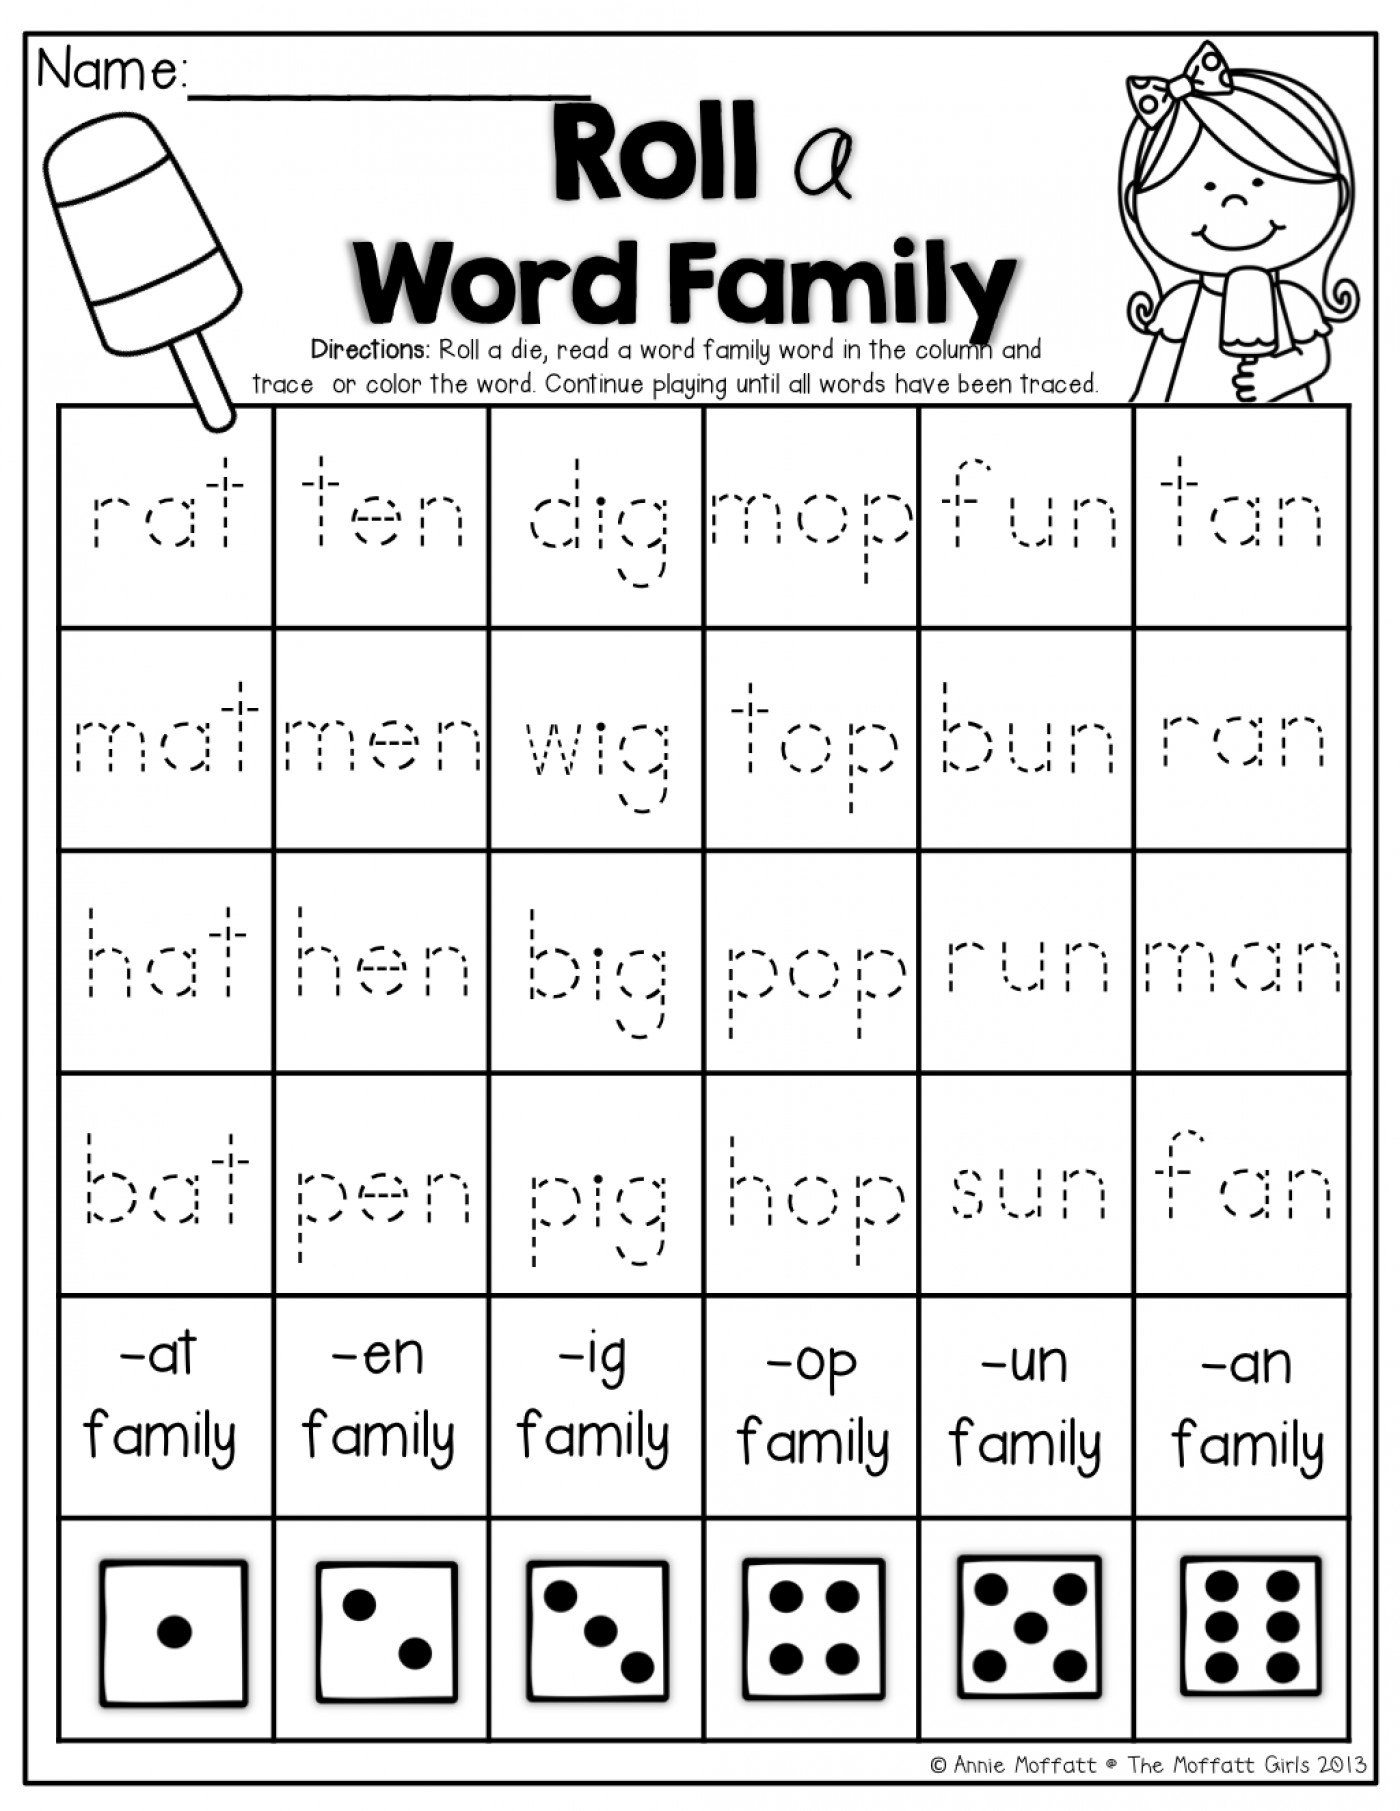 ig-word-family-worksheets